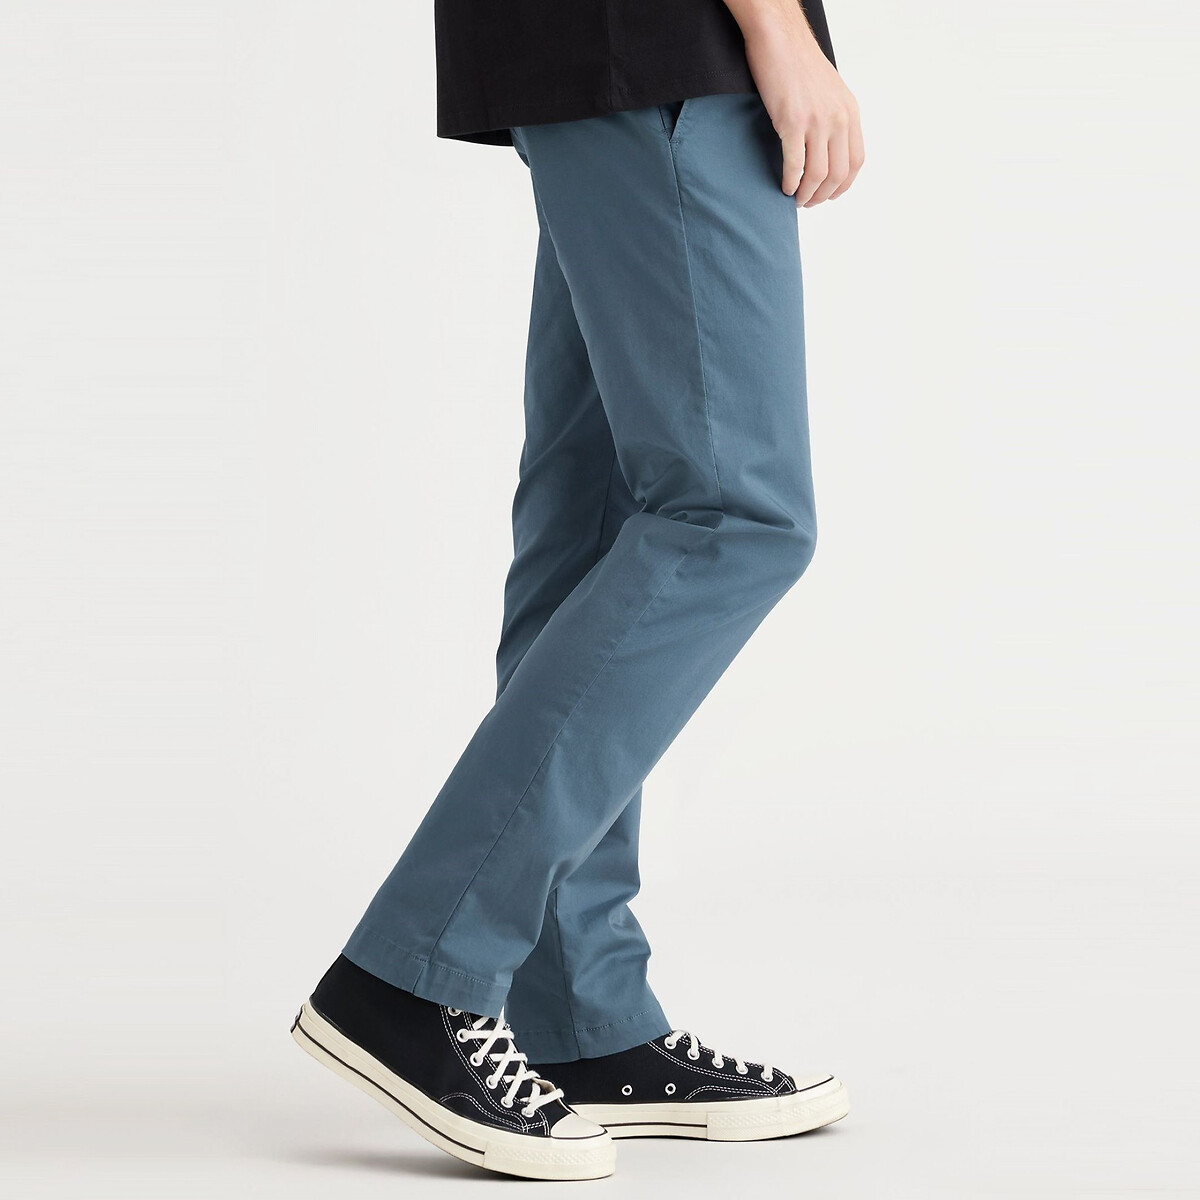 Image of Motion Cotton Chinos in Slim Fit